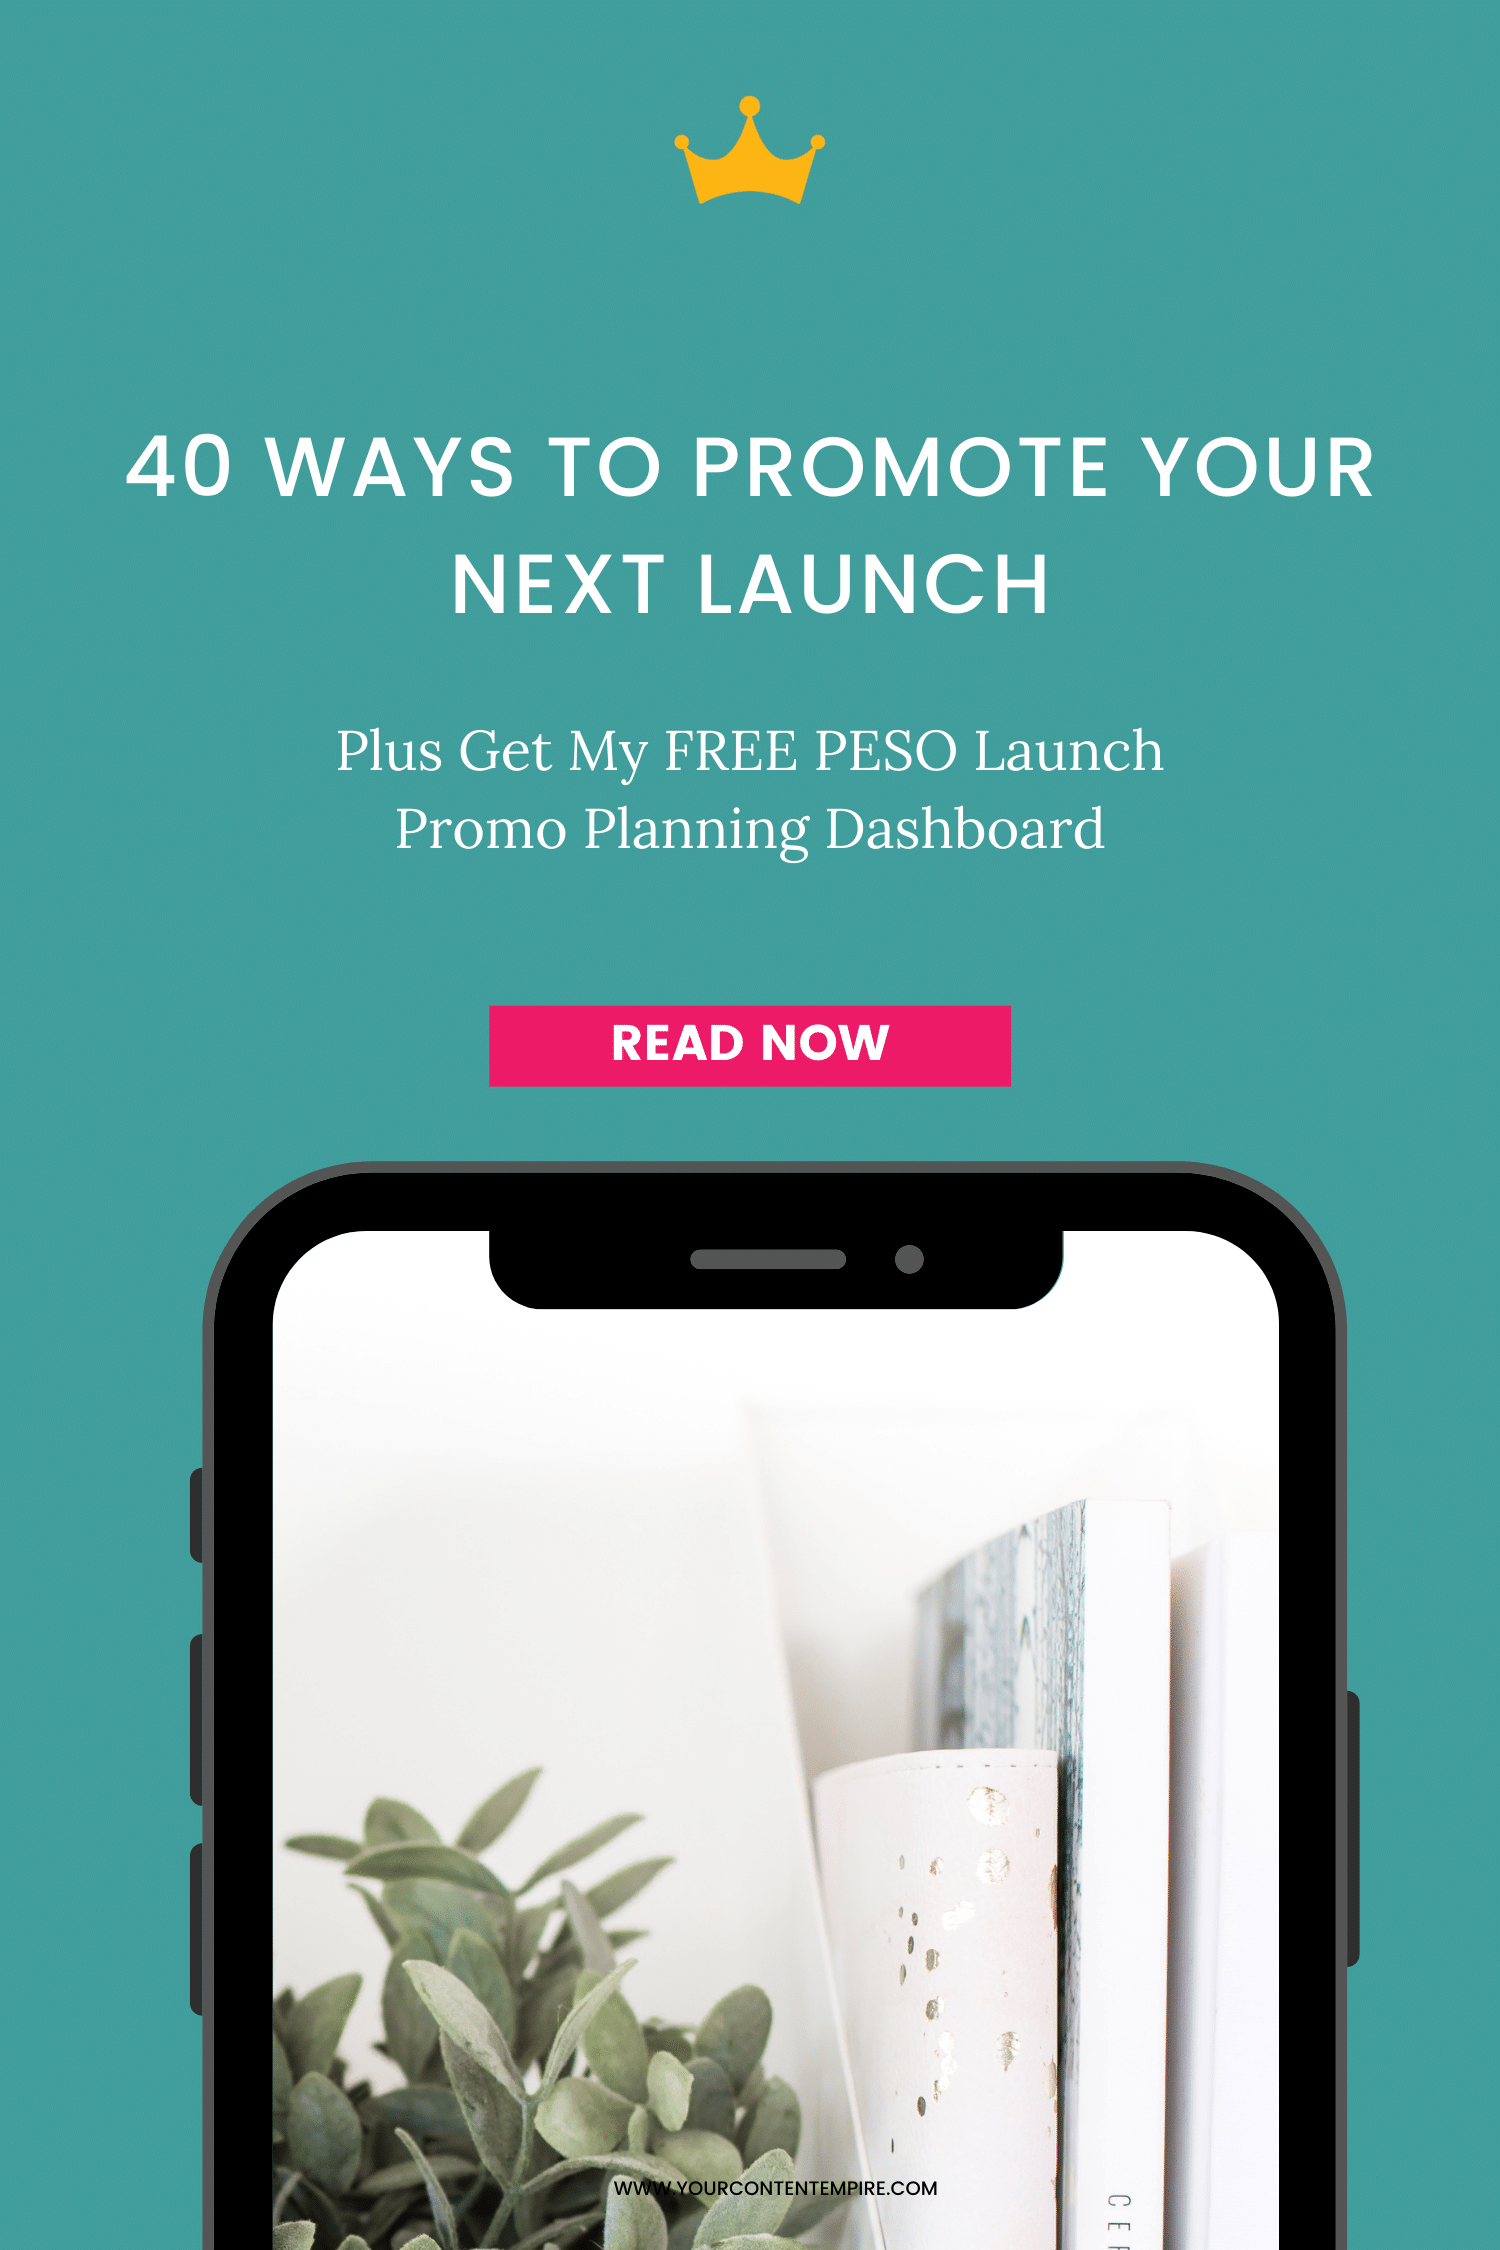 40 Ways to Promote Your Next Launch